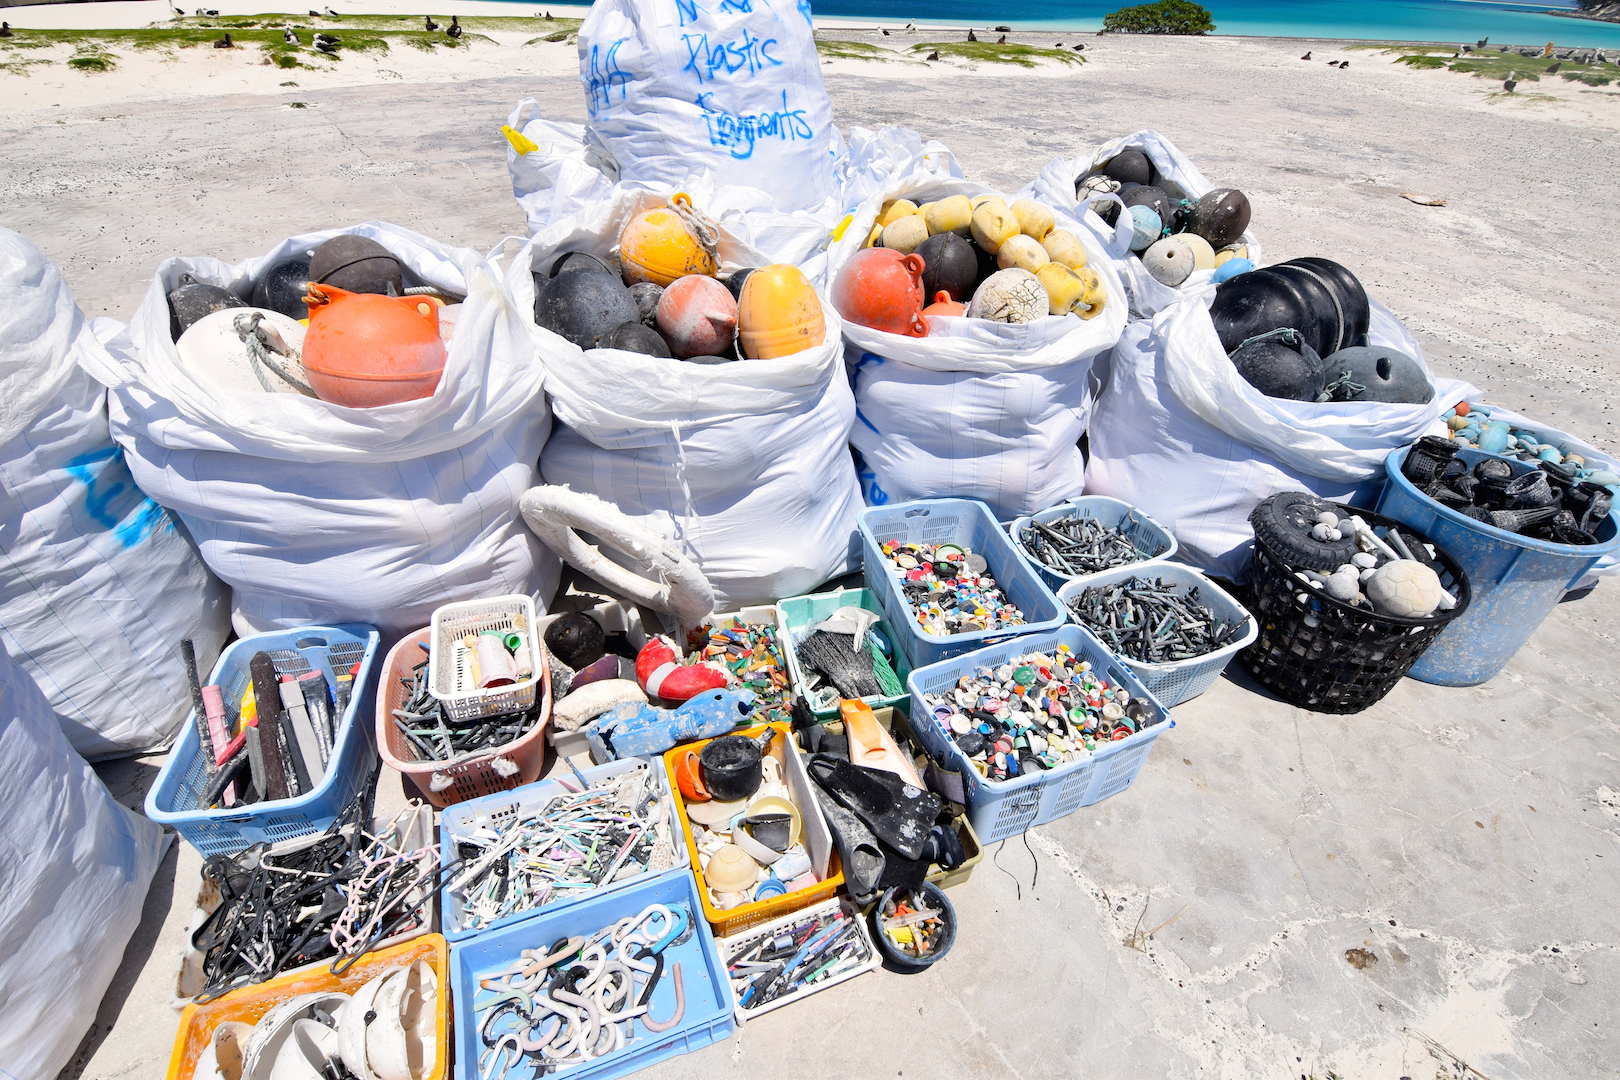 Midway, Atoll, Island, Northwestern, Hawaiian, beach, clean up, marine, debris, plastic, nets, floats, fishing, removal, oyster spacers, toothbrush, hardhats, umbrella handles, pens, bottle caps, life rings, bottles, baseballs, eel cone traps, lighters